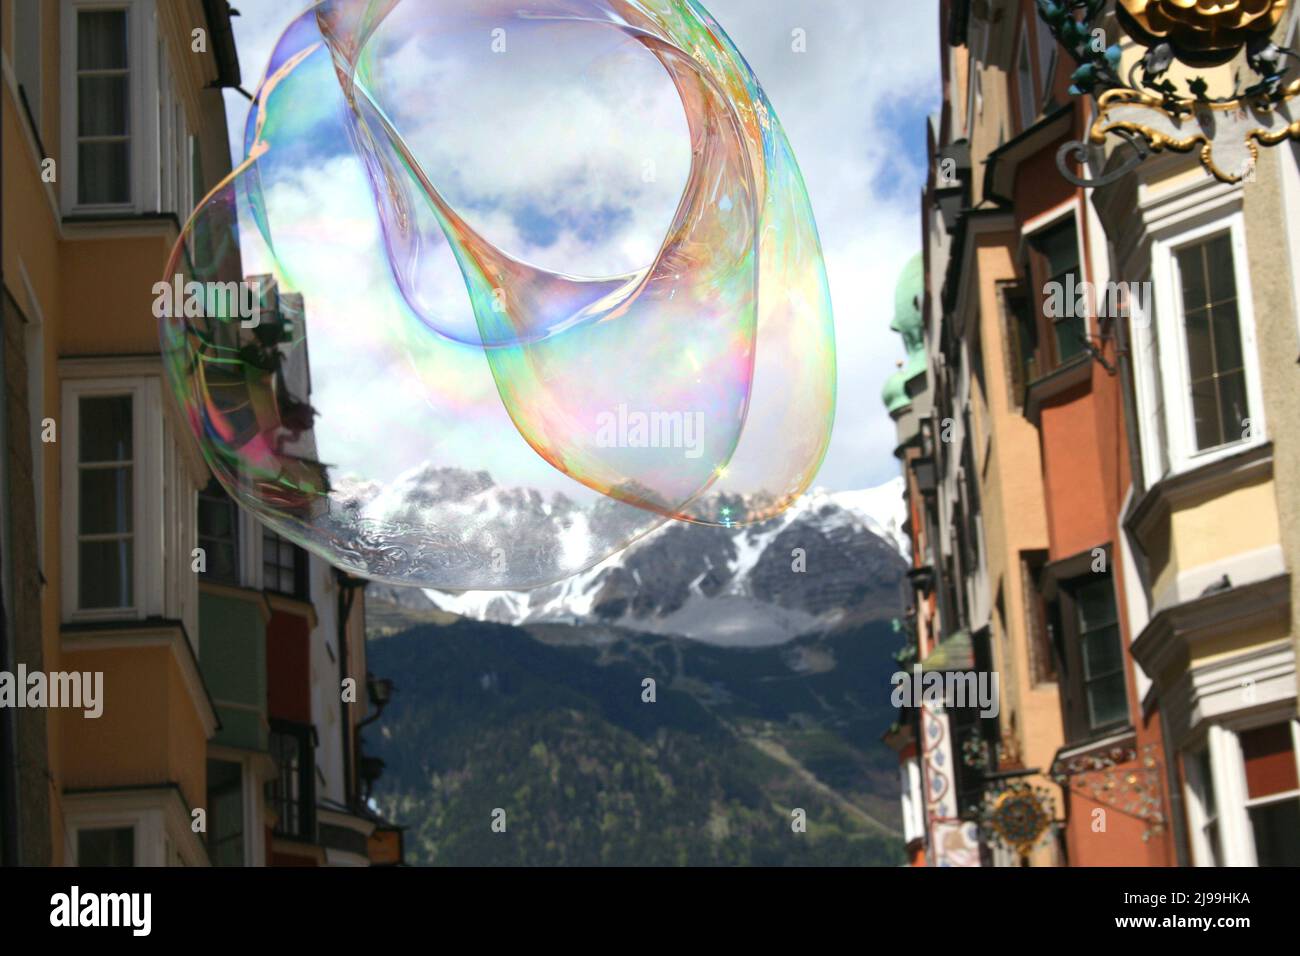 A large soap bubble with rainbow colors floats in the sky, framed by old buildings in Innsbruck. Stock Photo